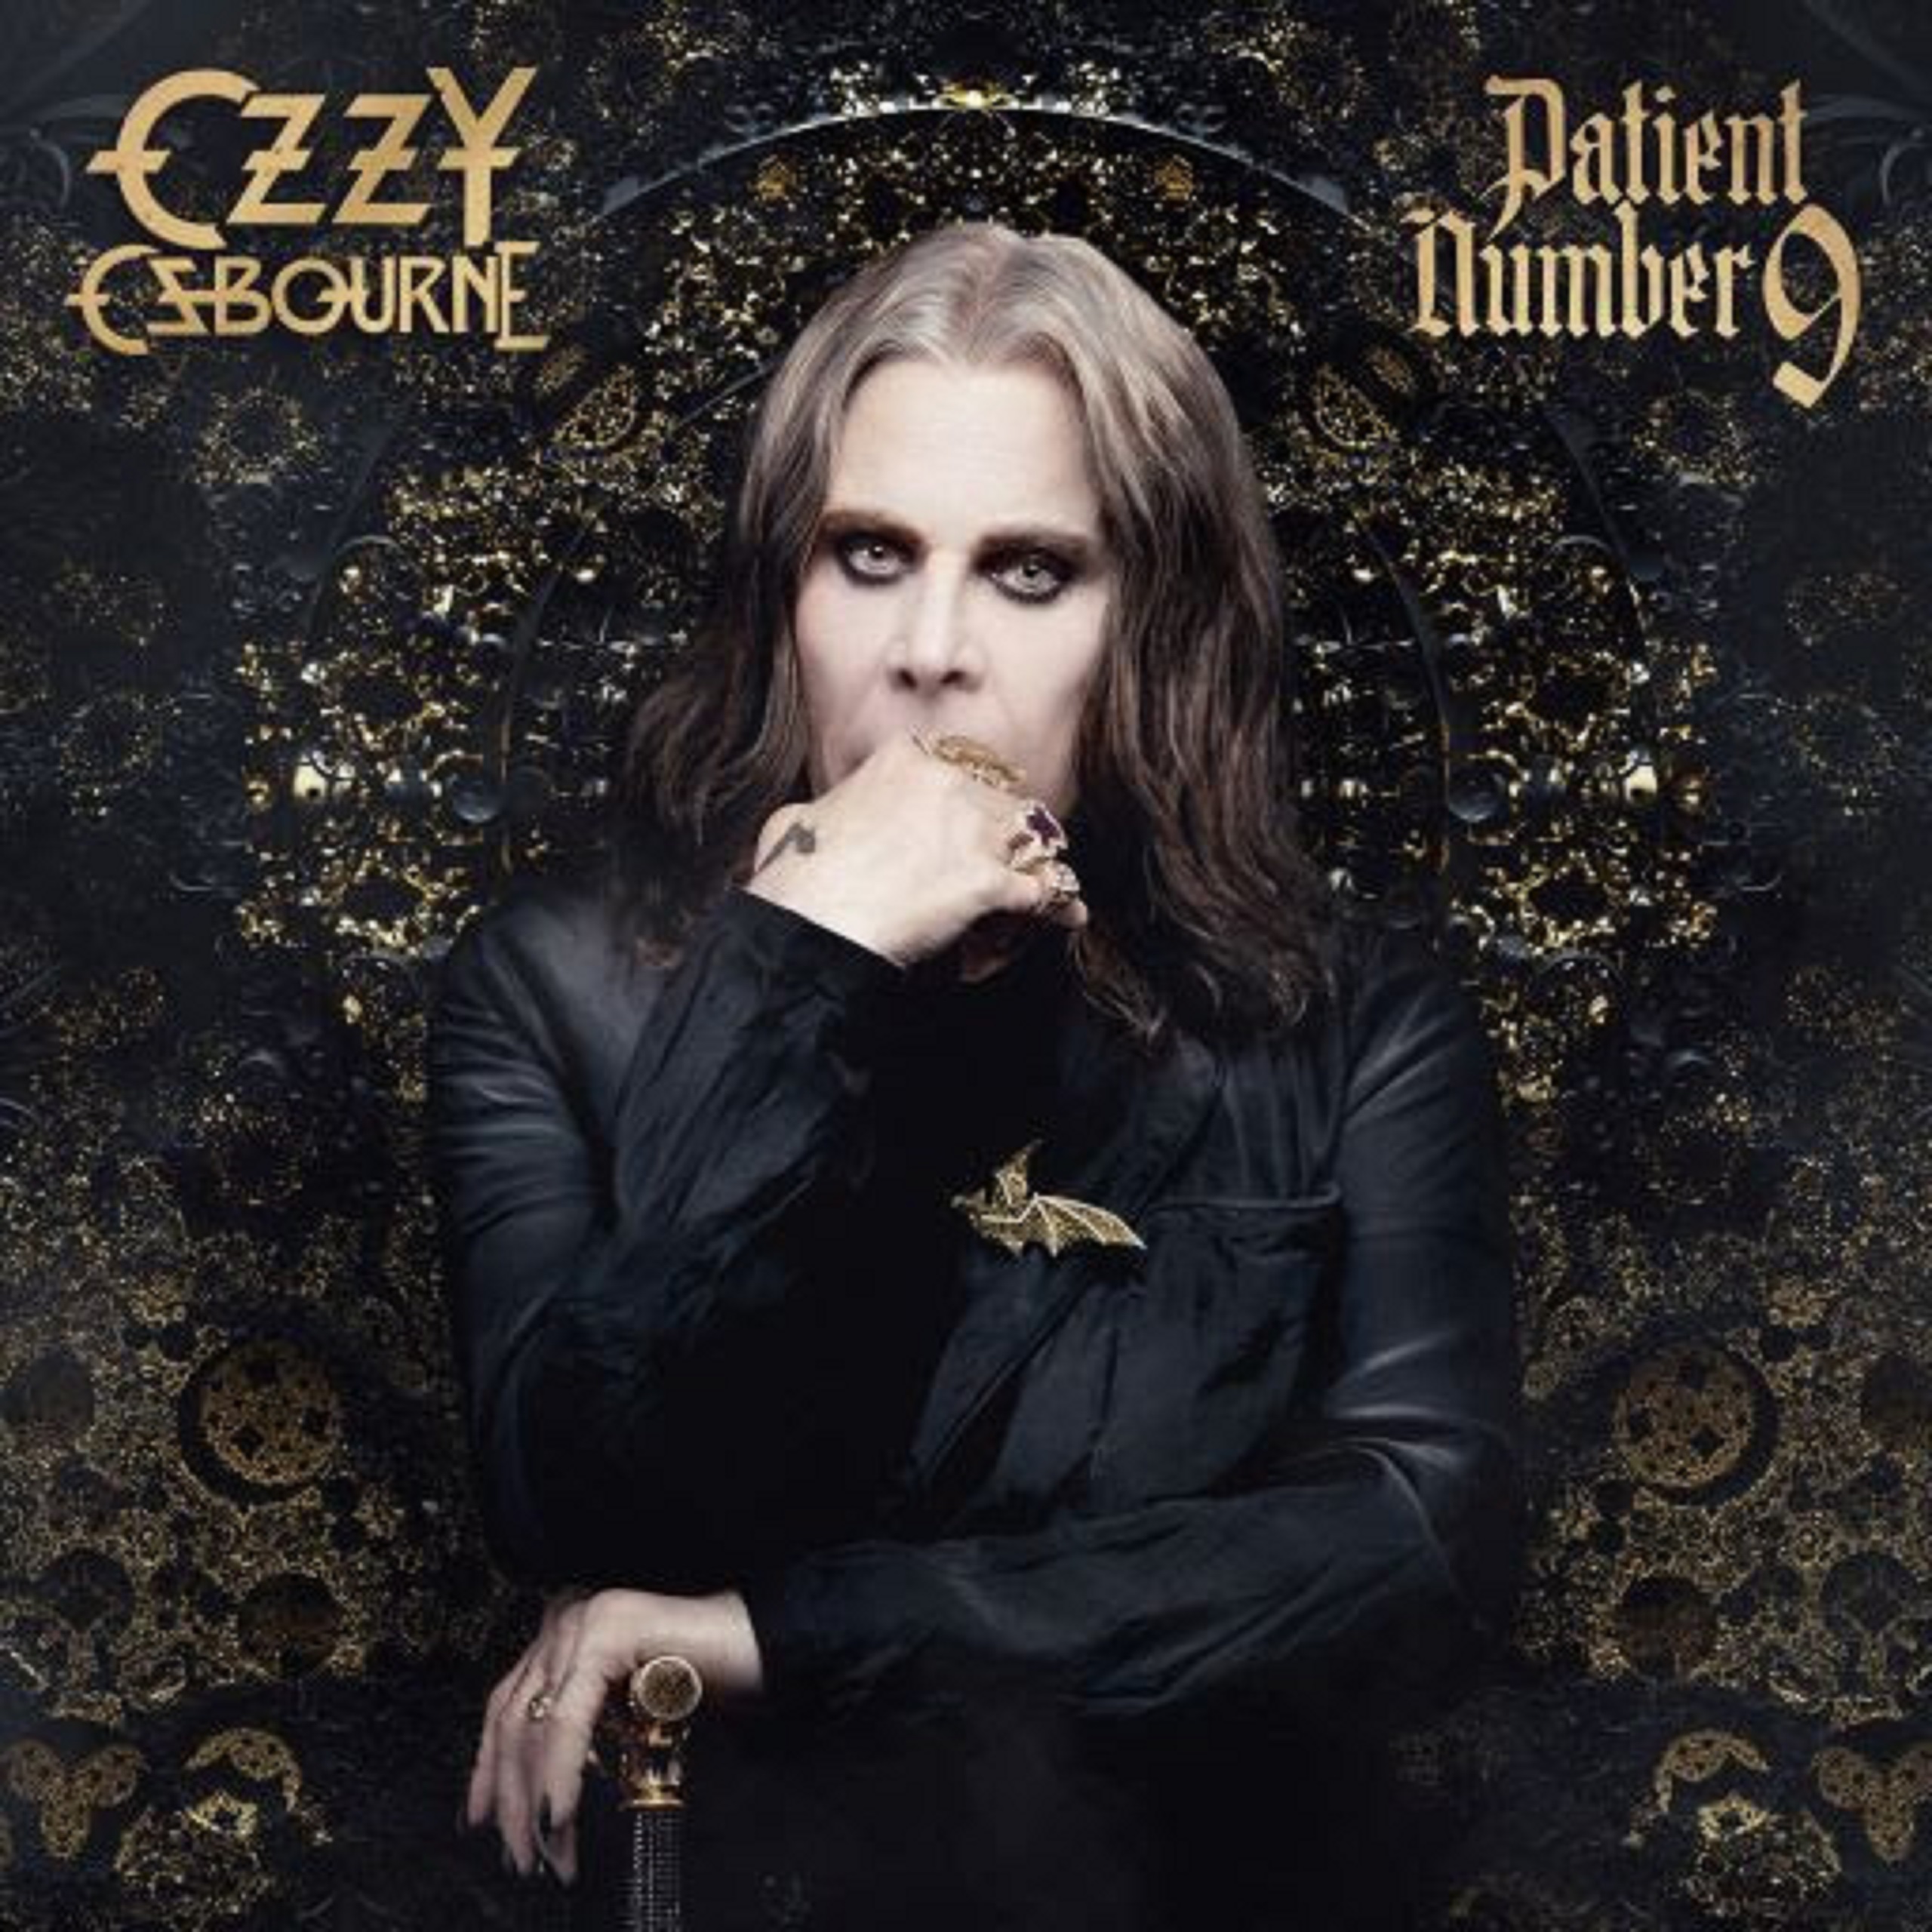 OZZY OSBOURNE Earns First-Ever Career Back-To-Back #1 Rock Radio Singles From ‘Patient Number 9’ Album